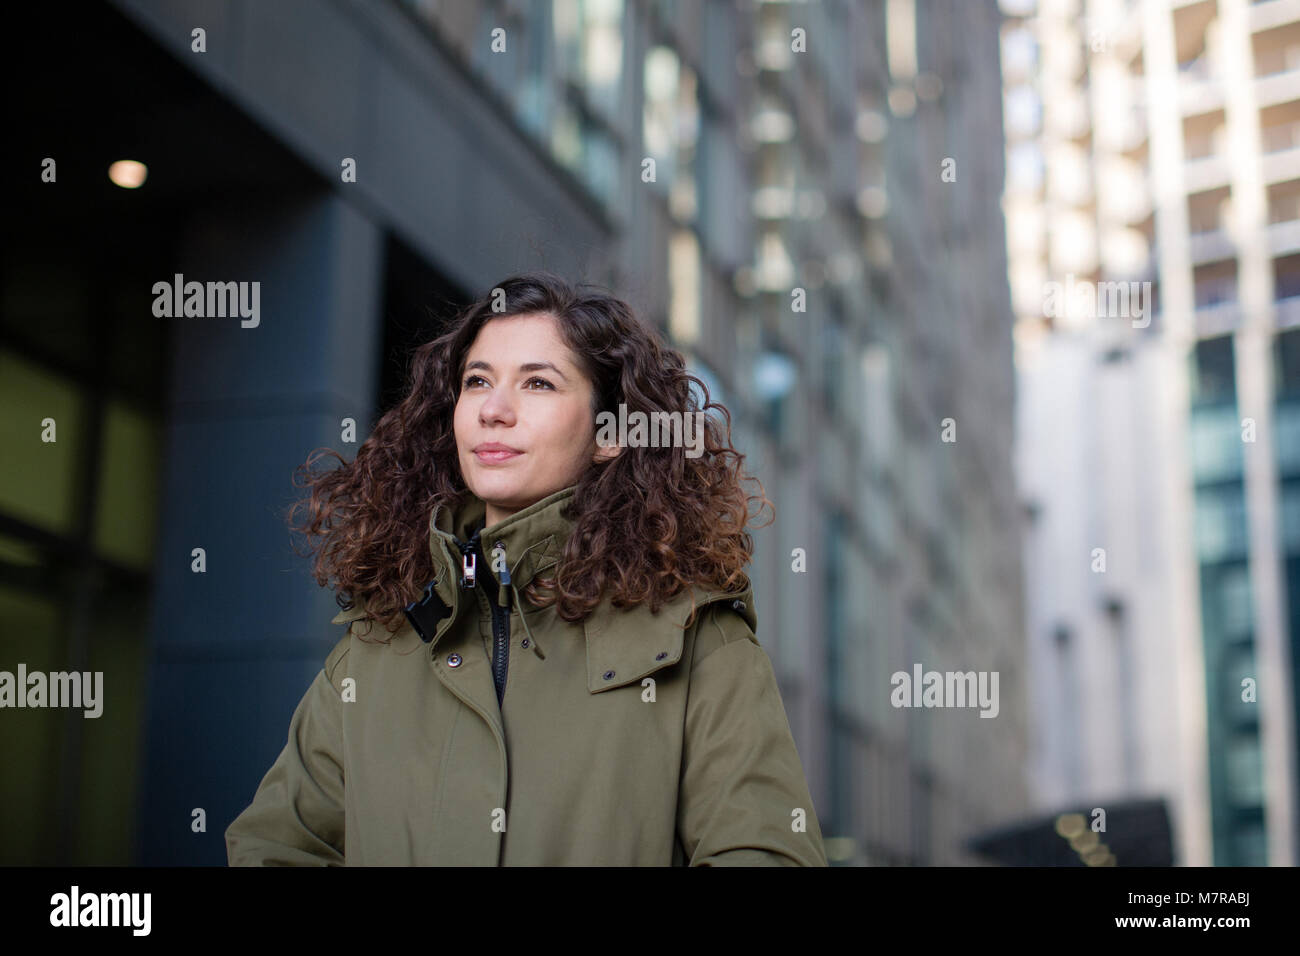 Young adult female walking in city Stock Photo